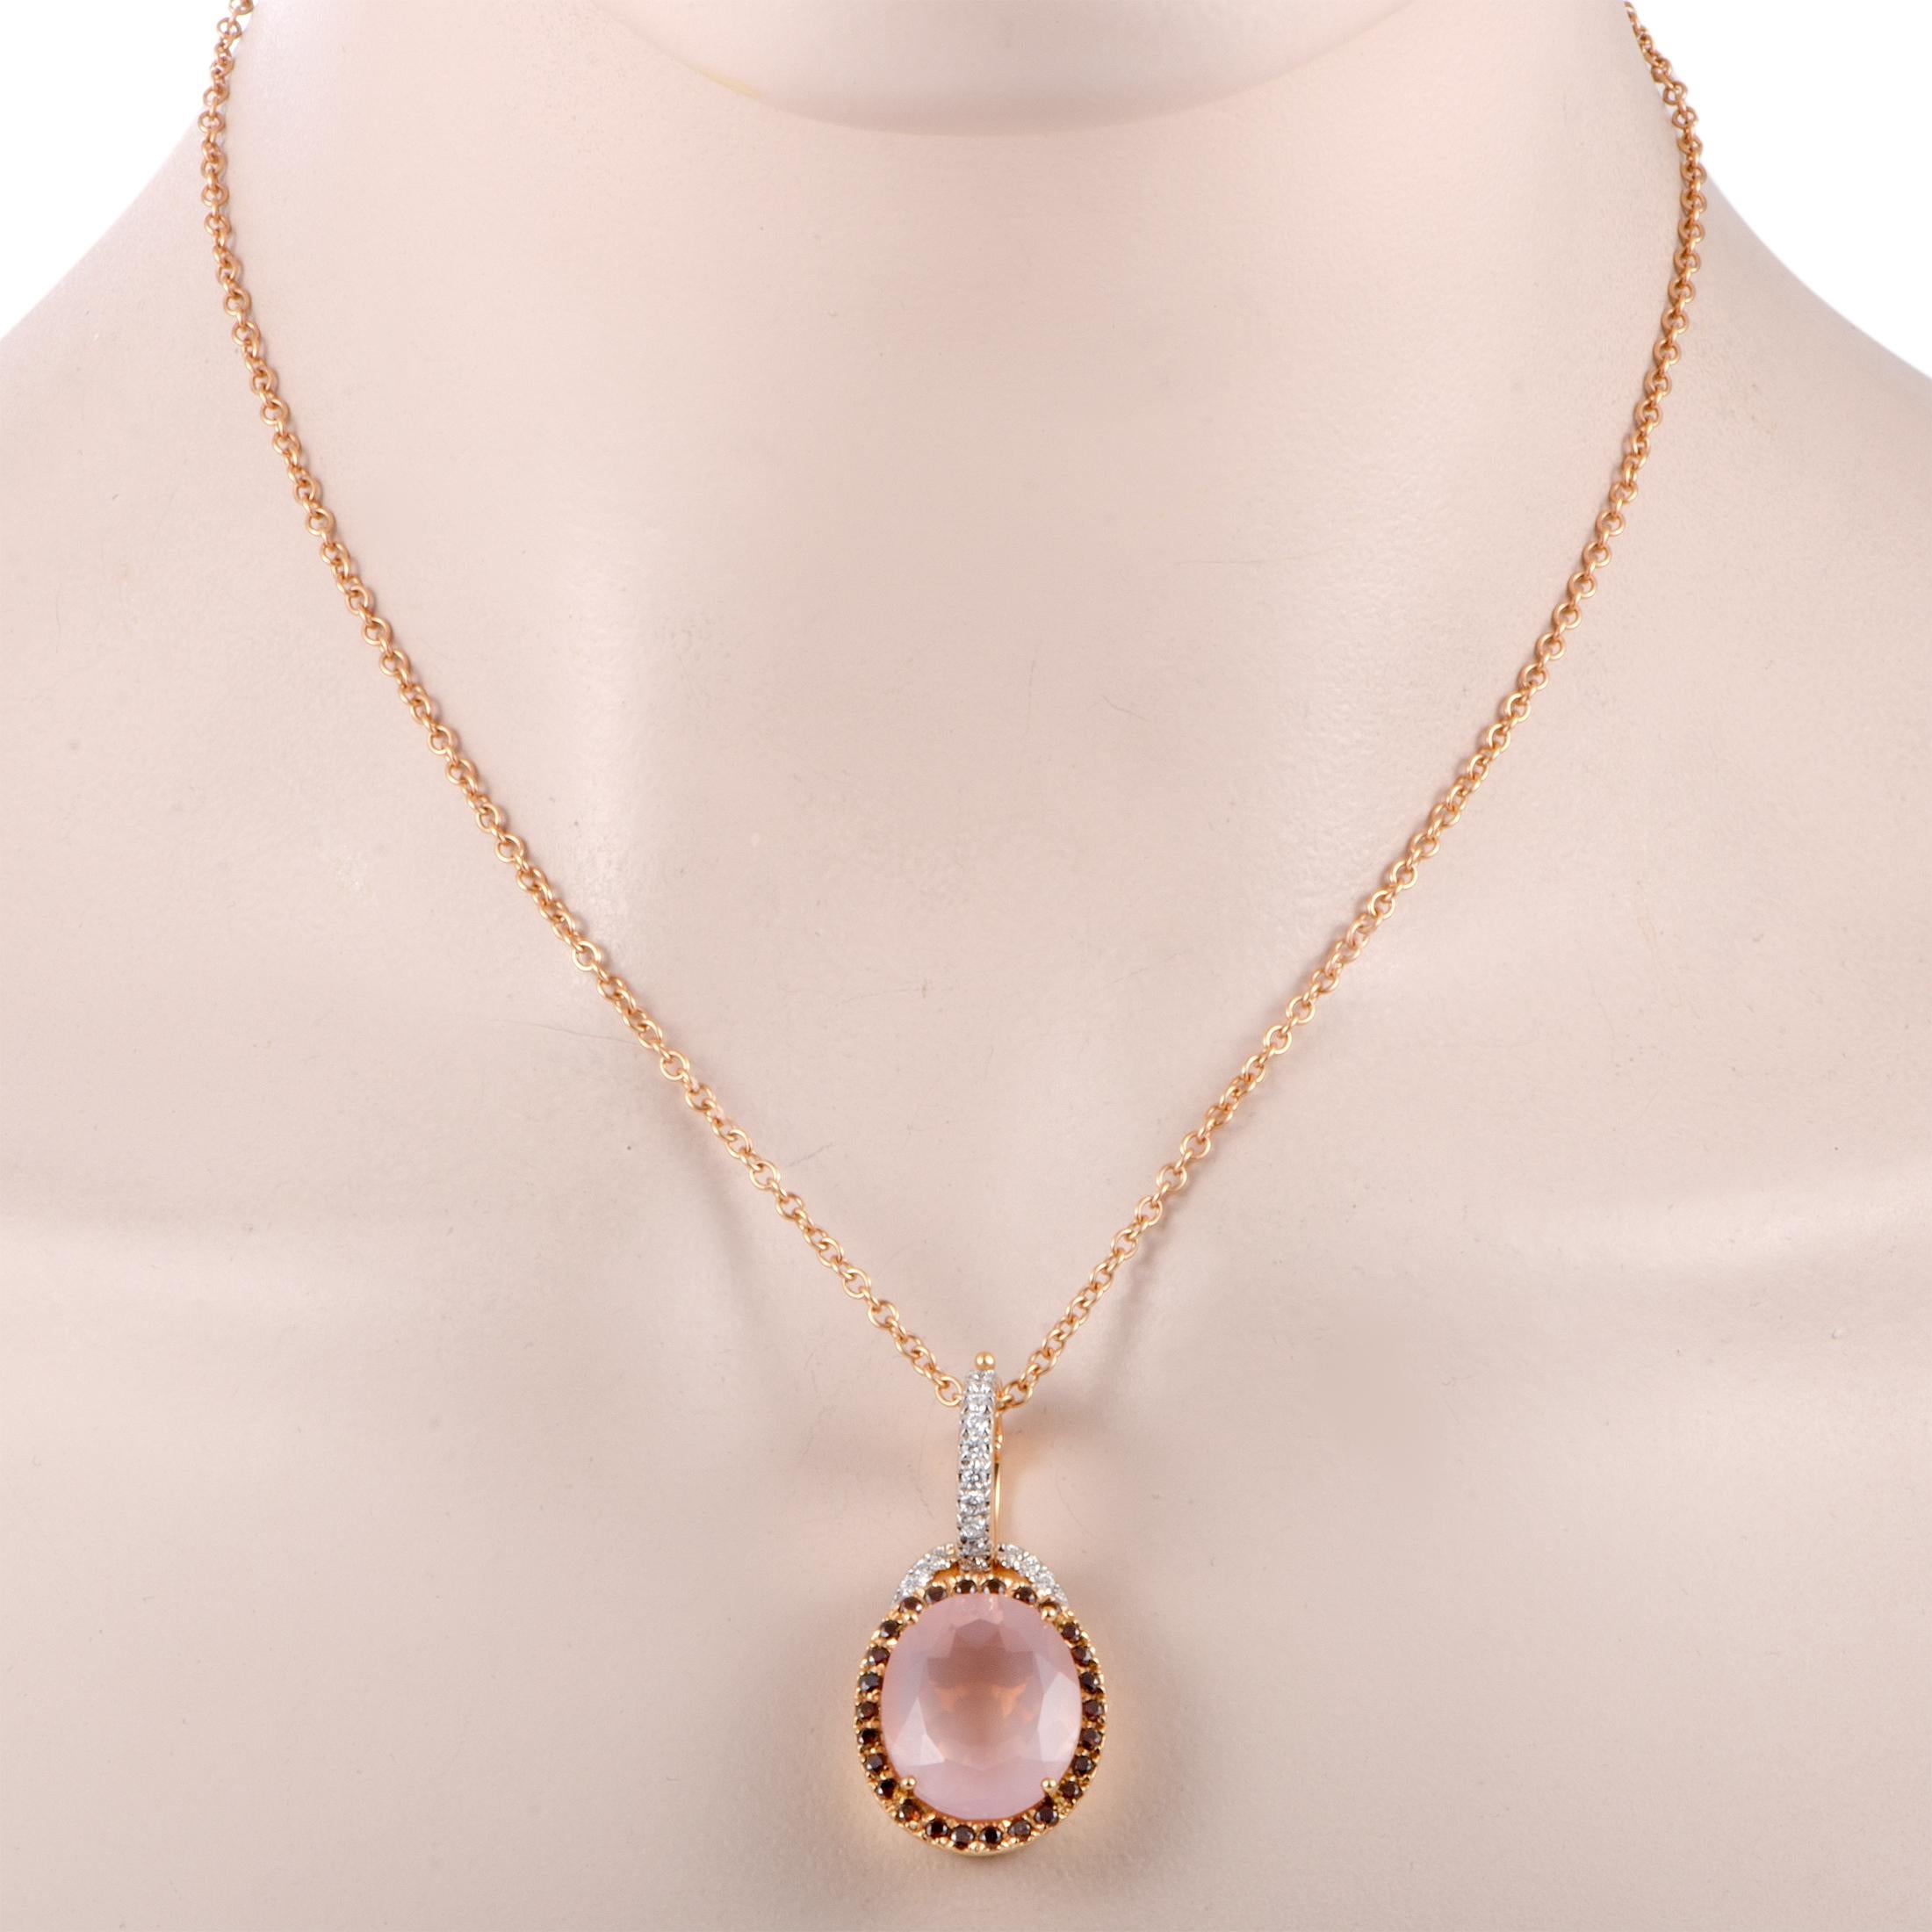 Designed in an exquisitely elegant fashion and beautifully embellished with a stylish blend of delightful gems, this gorgeous jewelry piece boasts an exceptionally charming appeal. The necklace is presented by Valente and it is splendidly made of